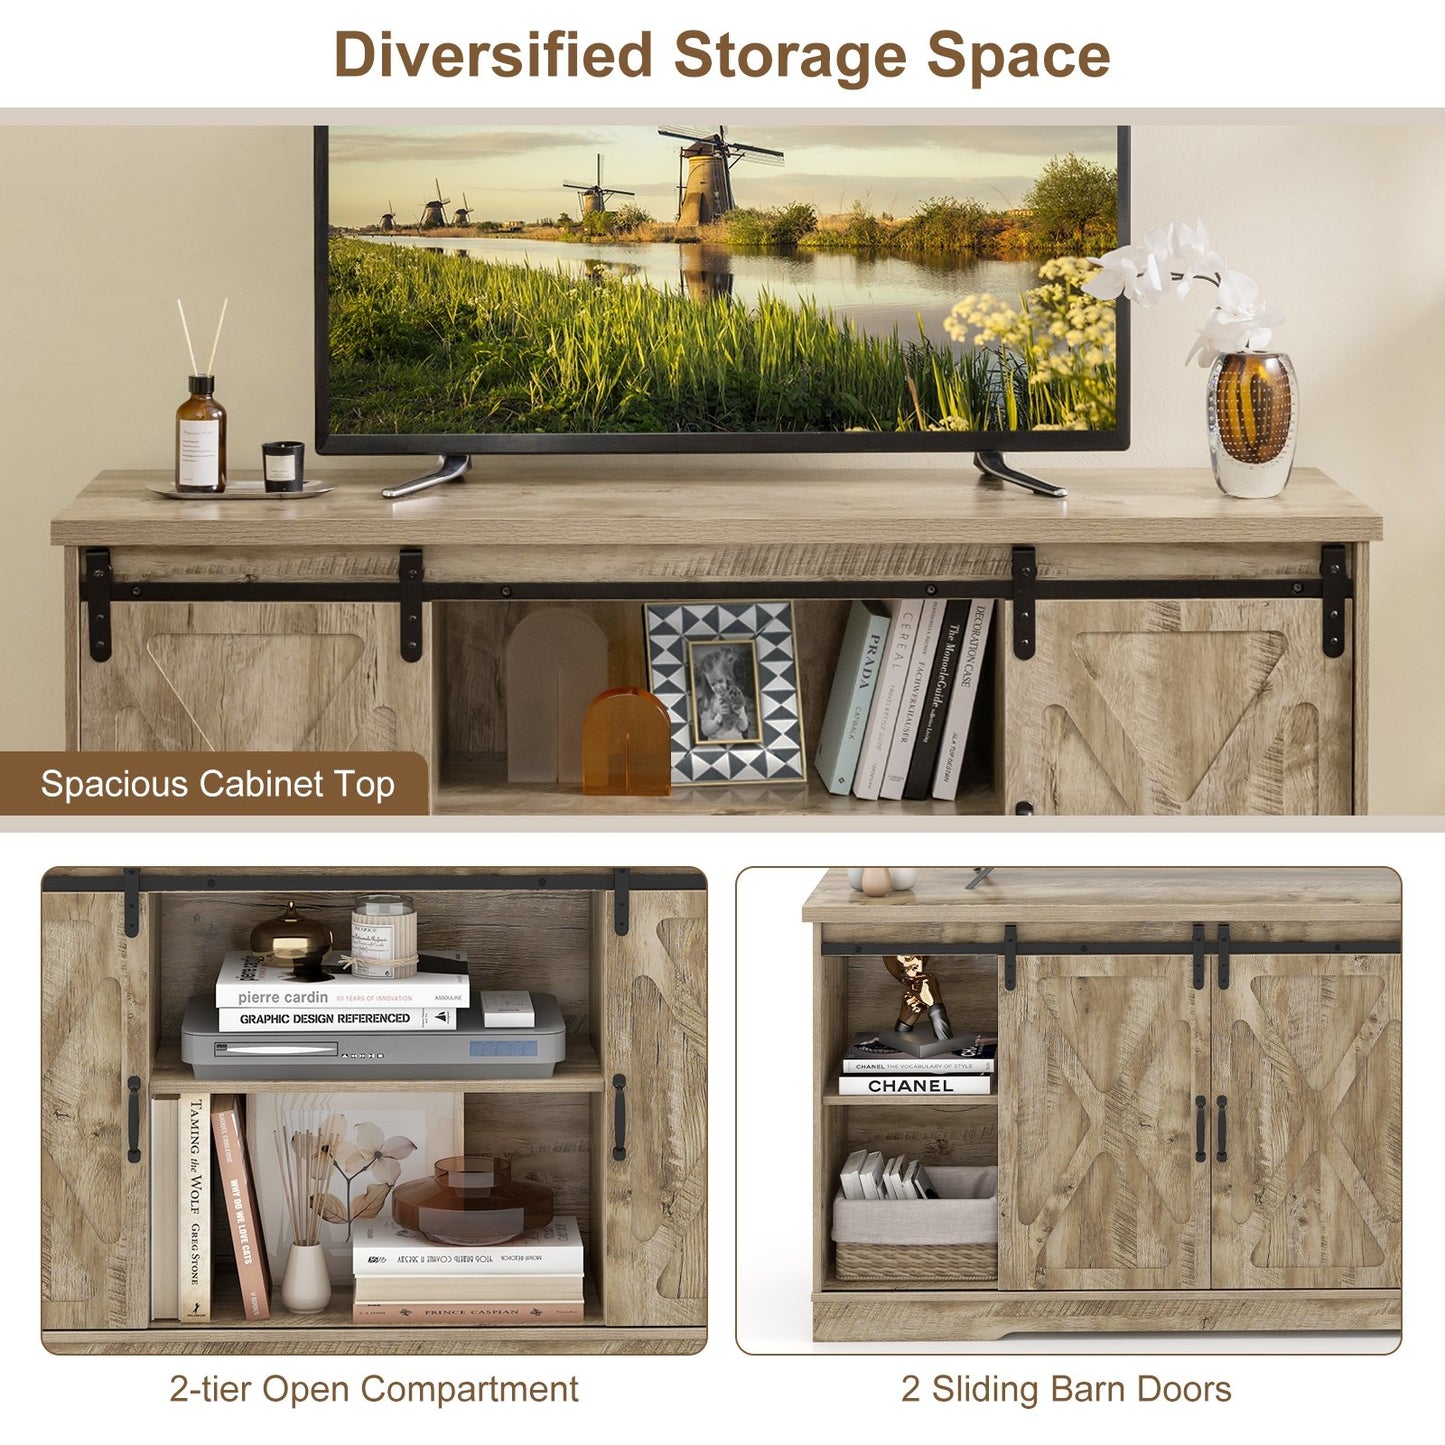 Farmhouse Entertainment Center with Adjustable Shelves and Storage Cabinet, Gray